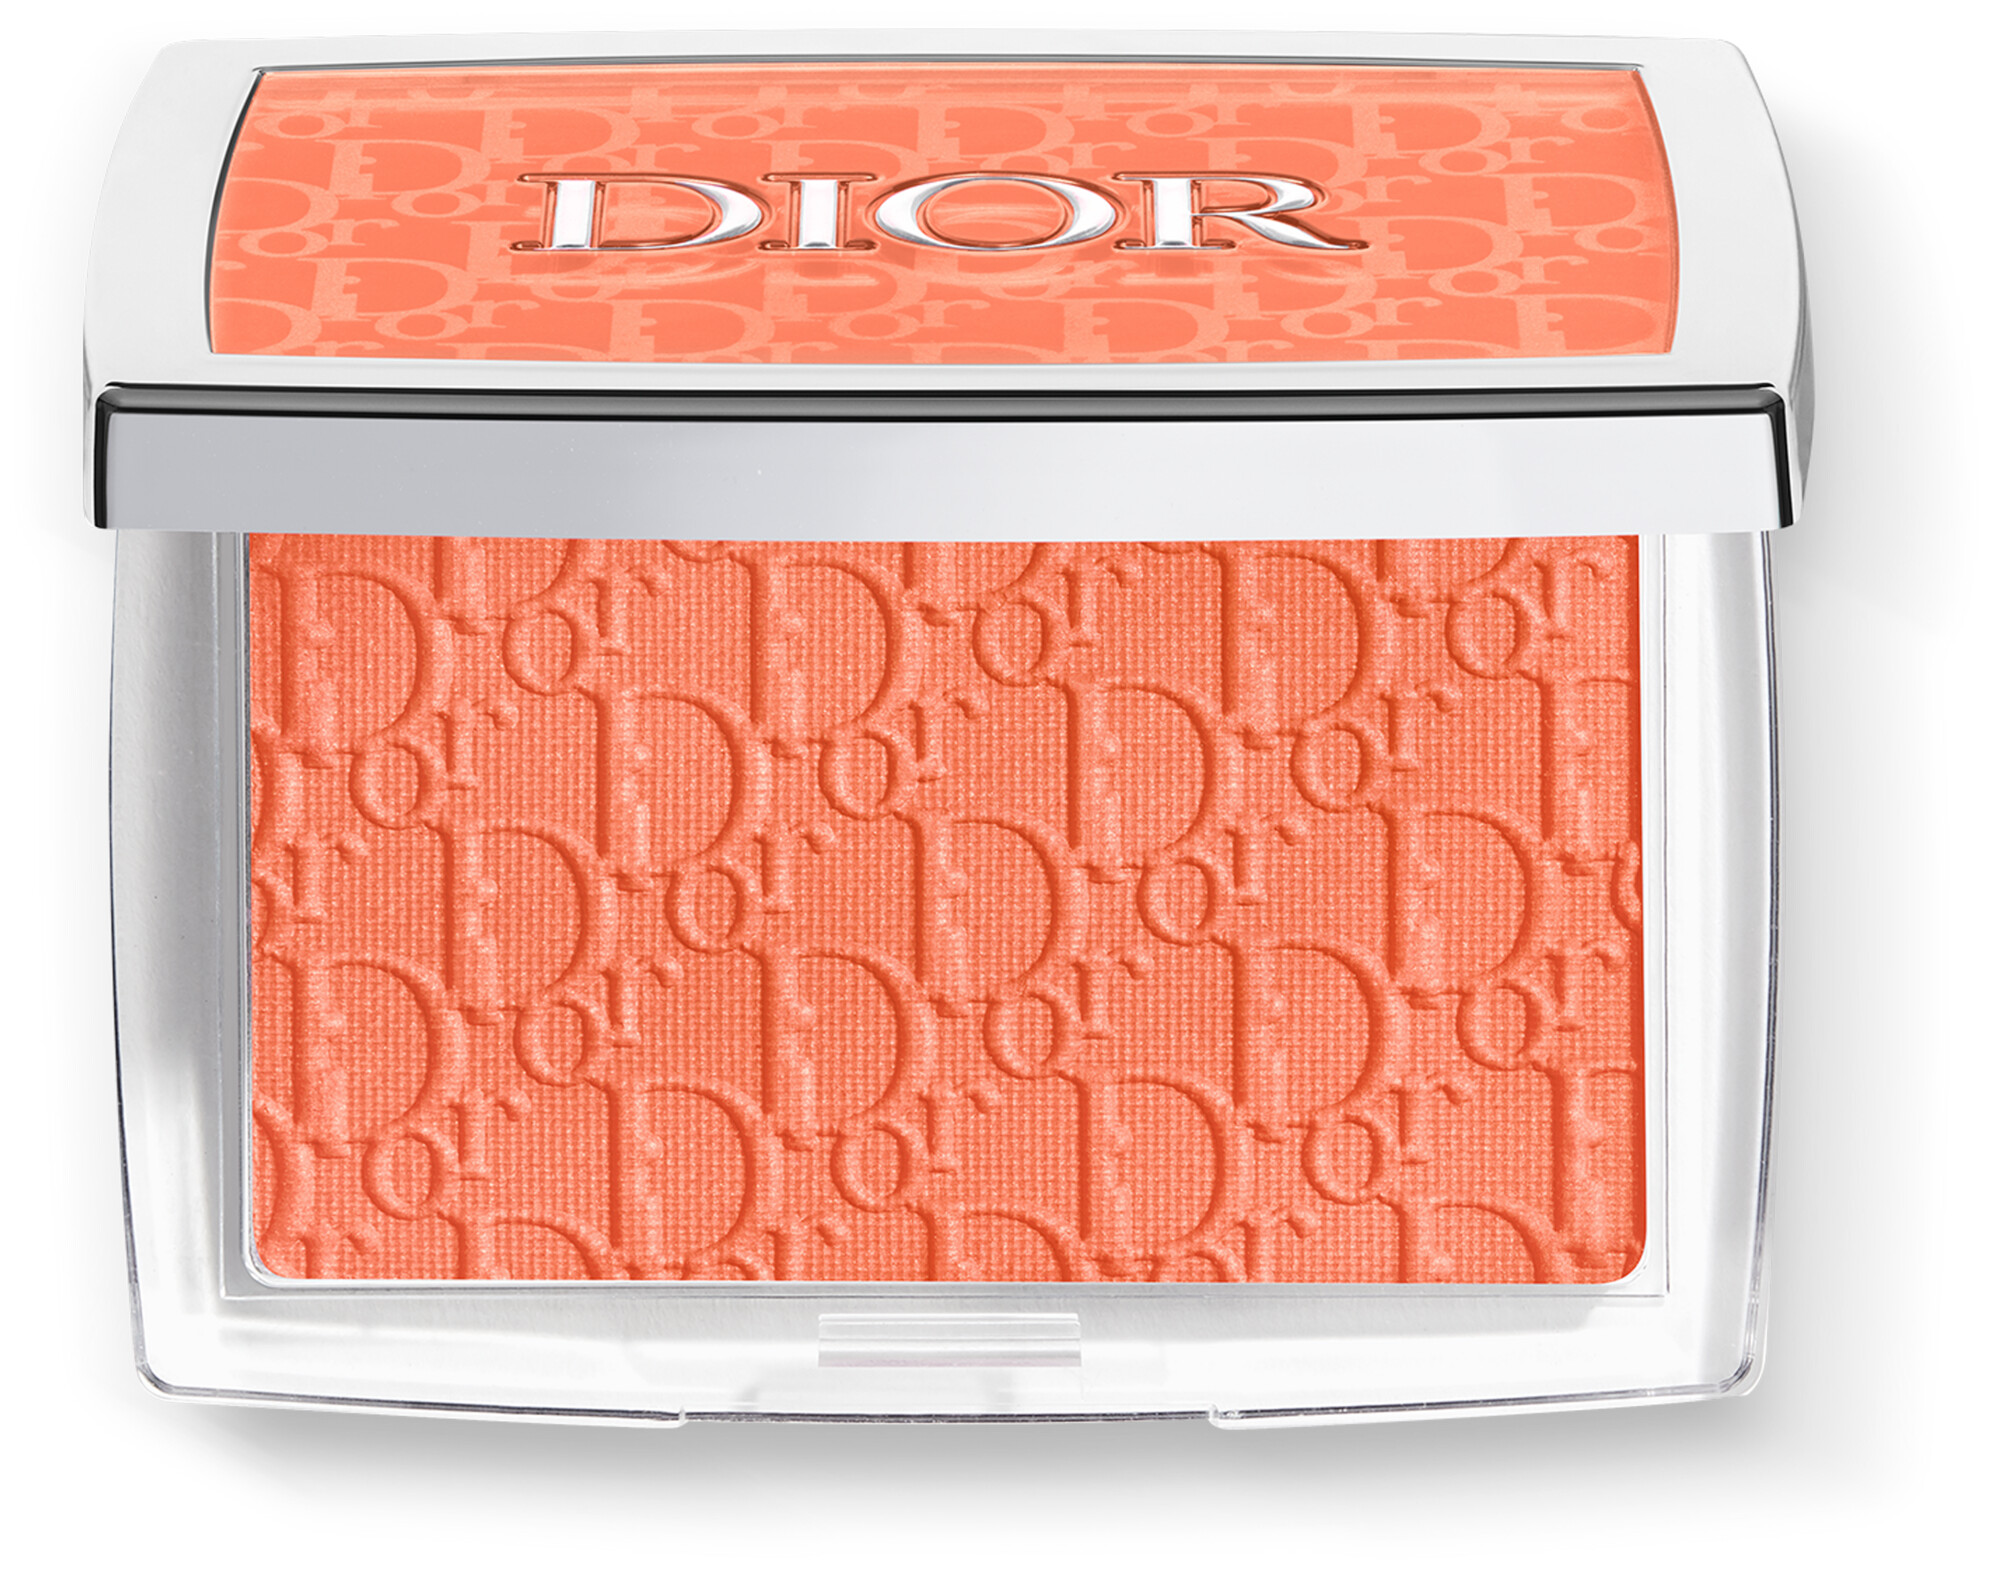 DIOR Backstage Rosy Glow 4.4g 004 - Coral